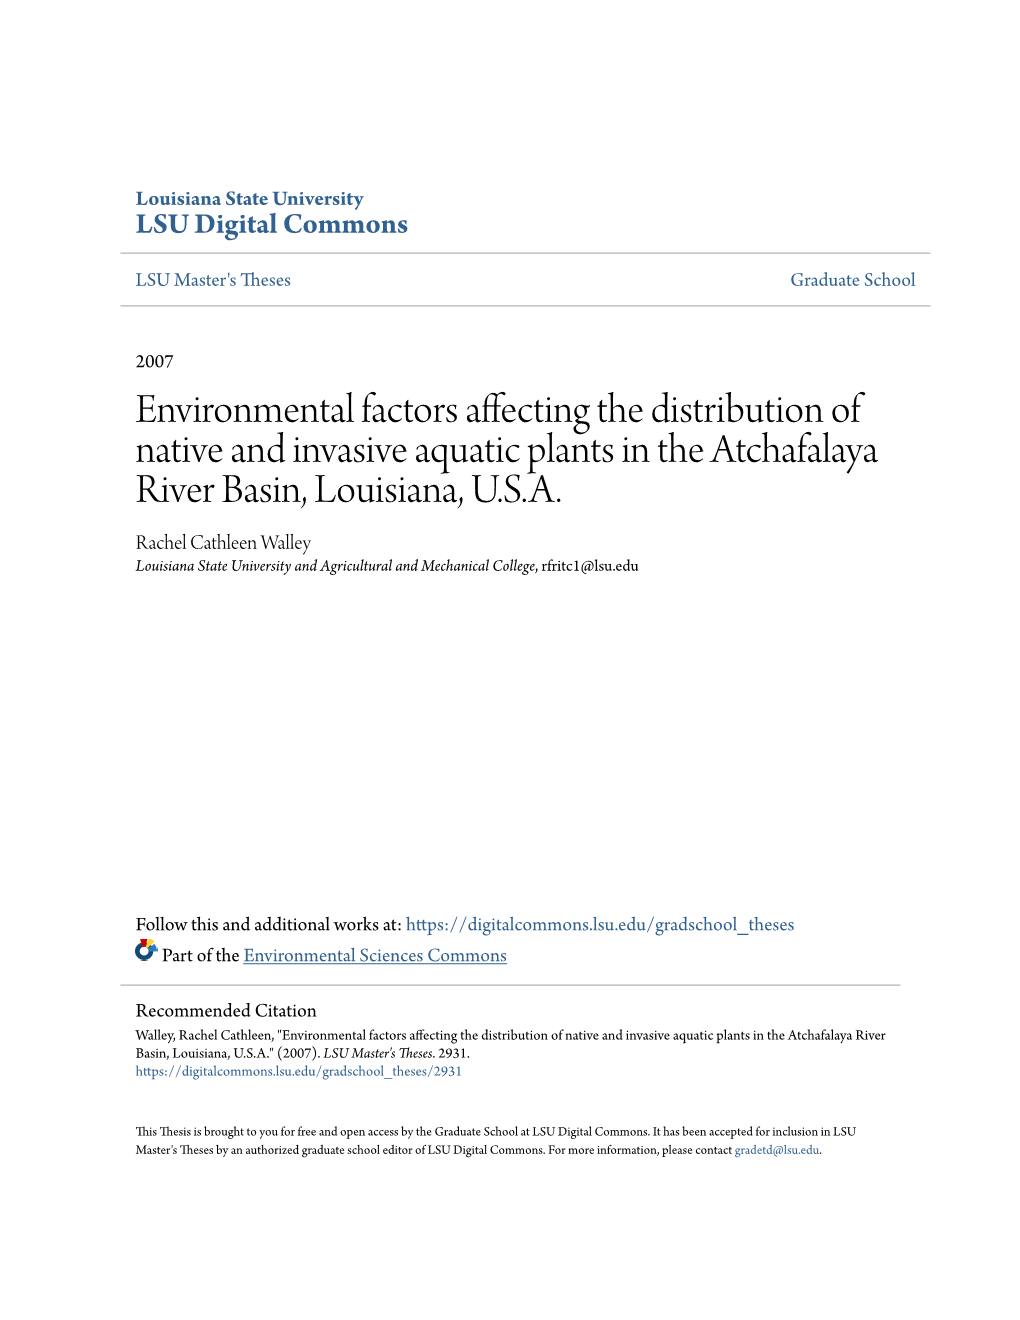 Environmental Factors Affecting the Distribution of Native and Invasive Aquatic Plants in the Atchafalaya River Basin, Louisiana, U.S.A